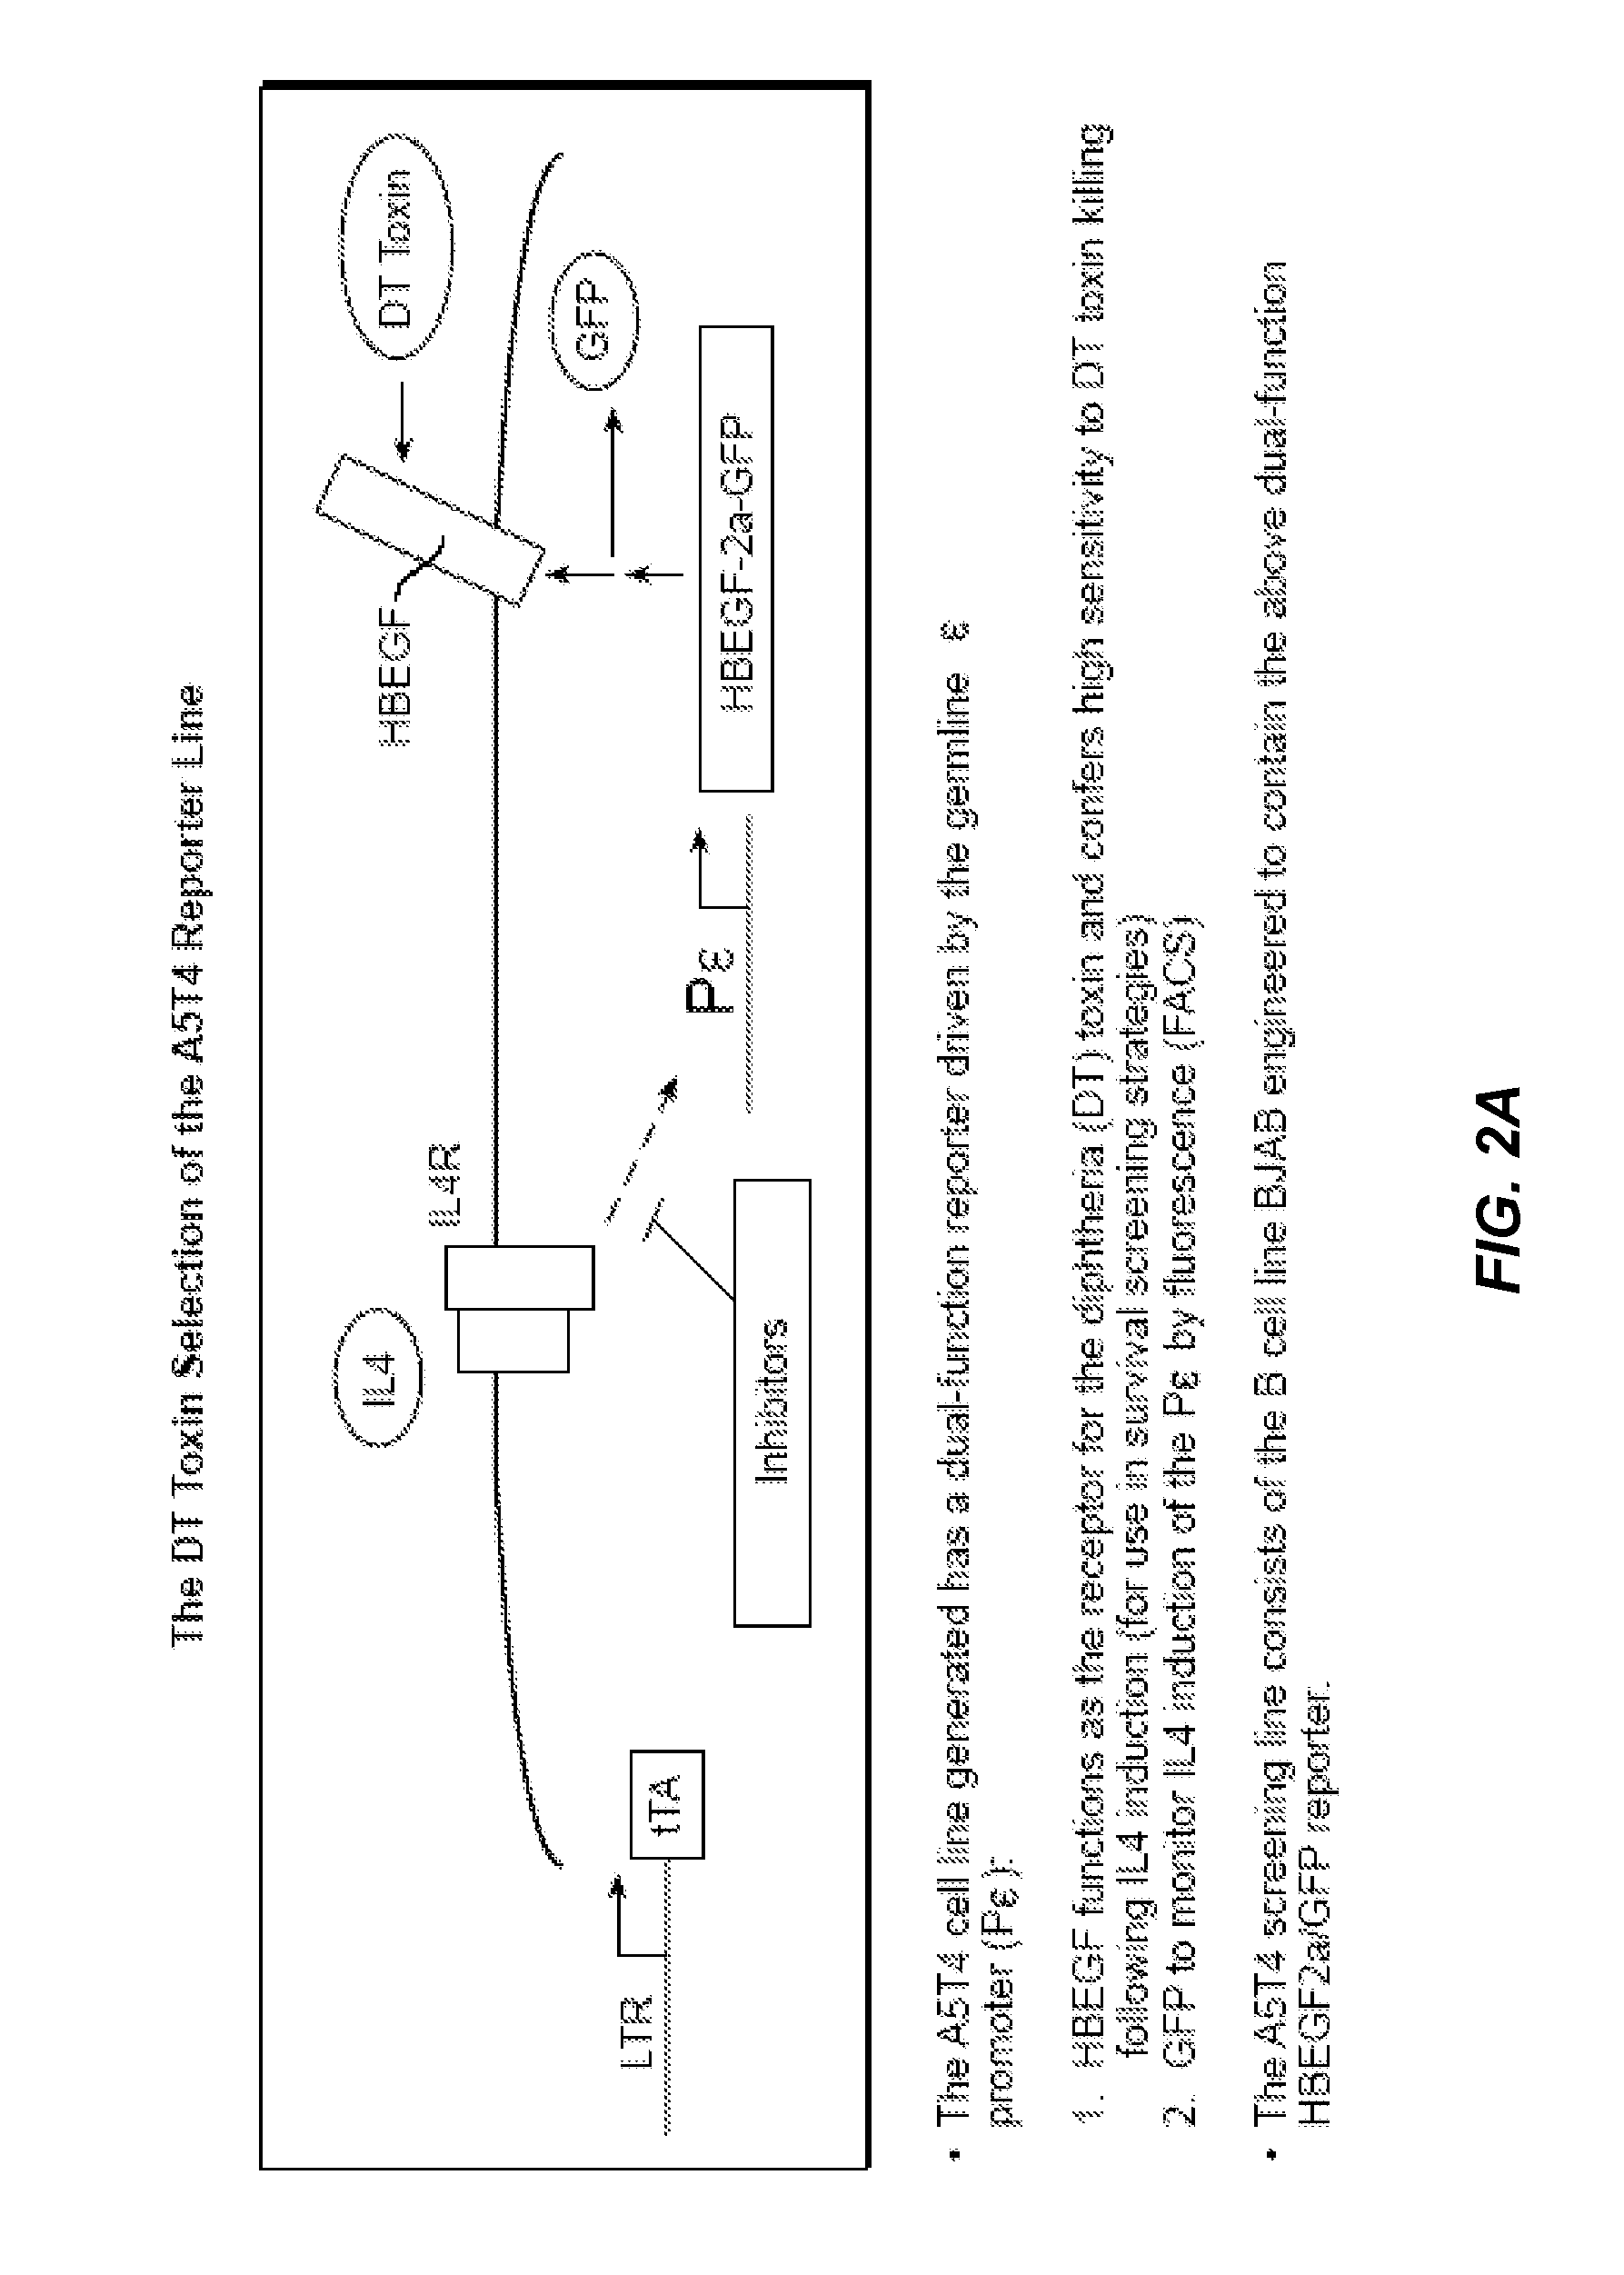 Methods of Identifying Compounds that Modulate IL-4 Receptor-Mediated IgE Synthesis Utilizing an Adenosine Kinase